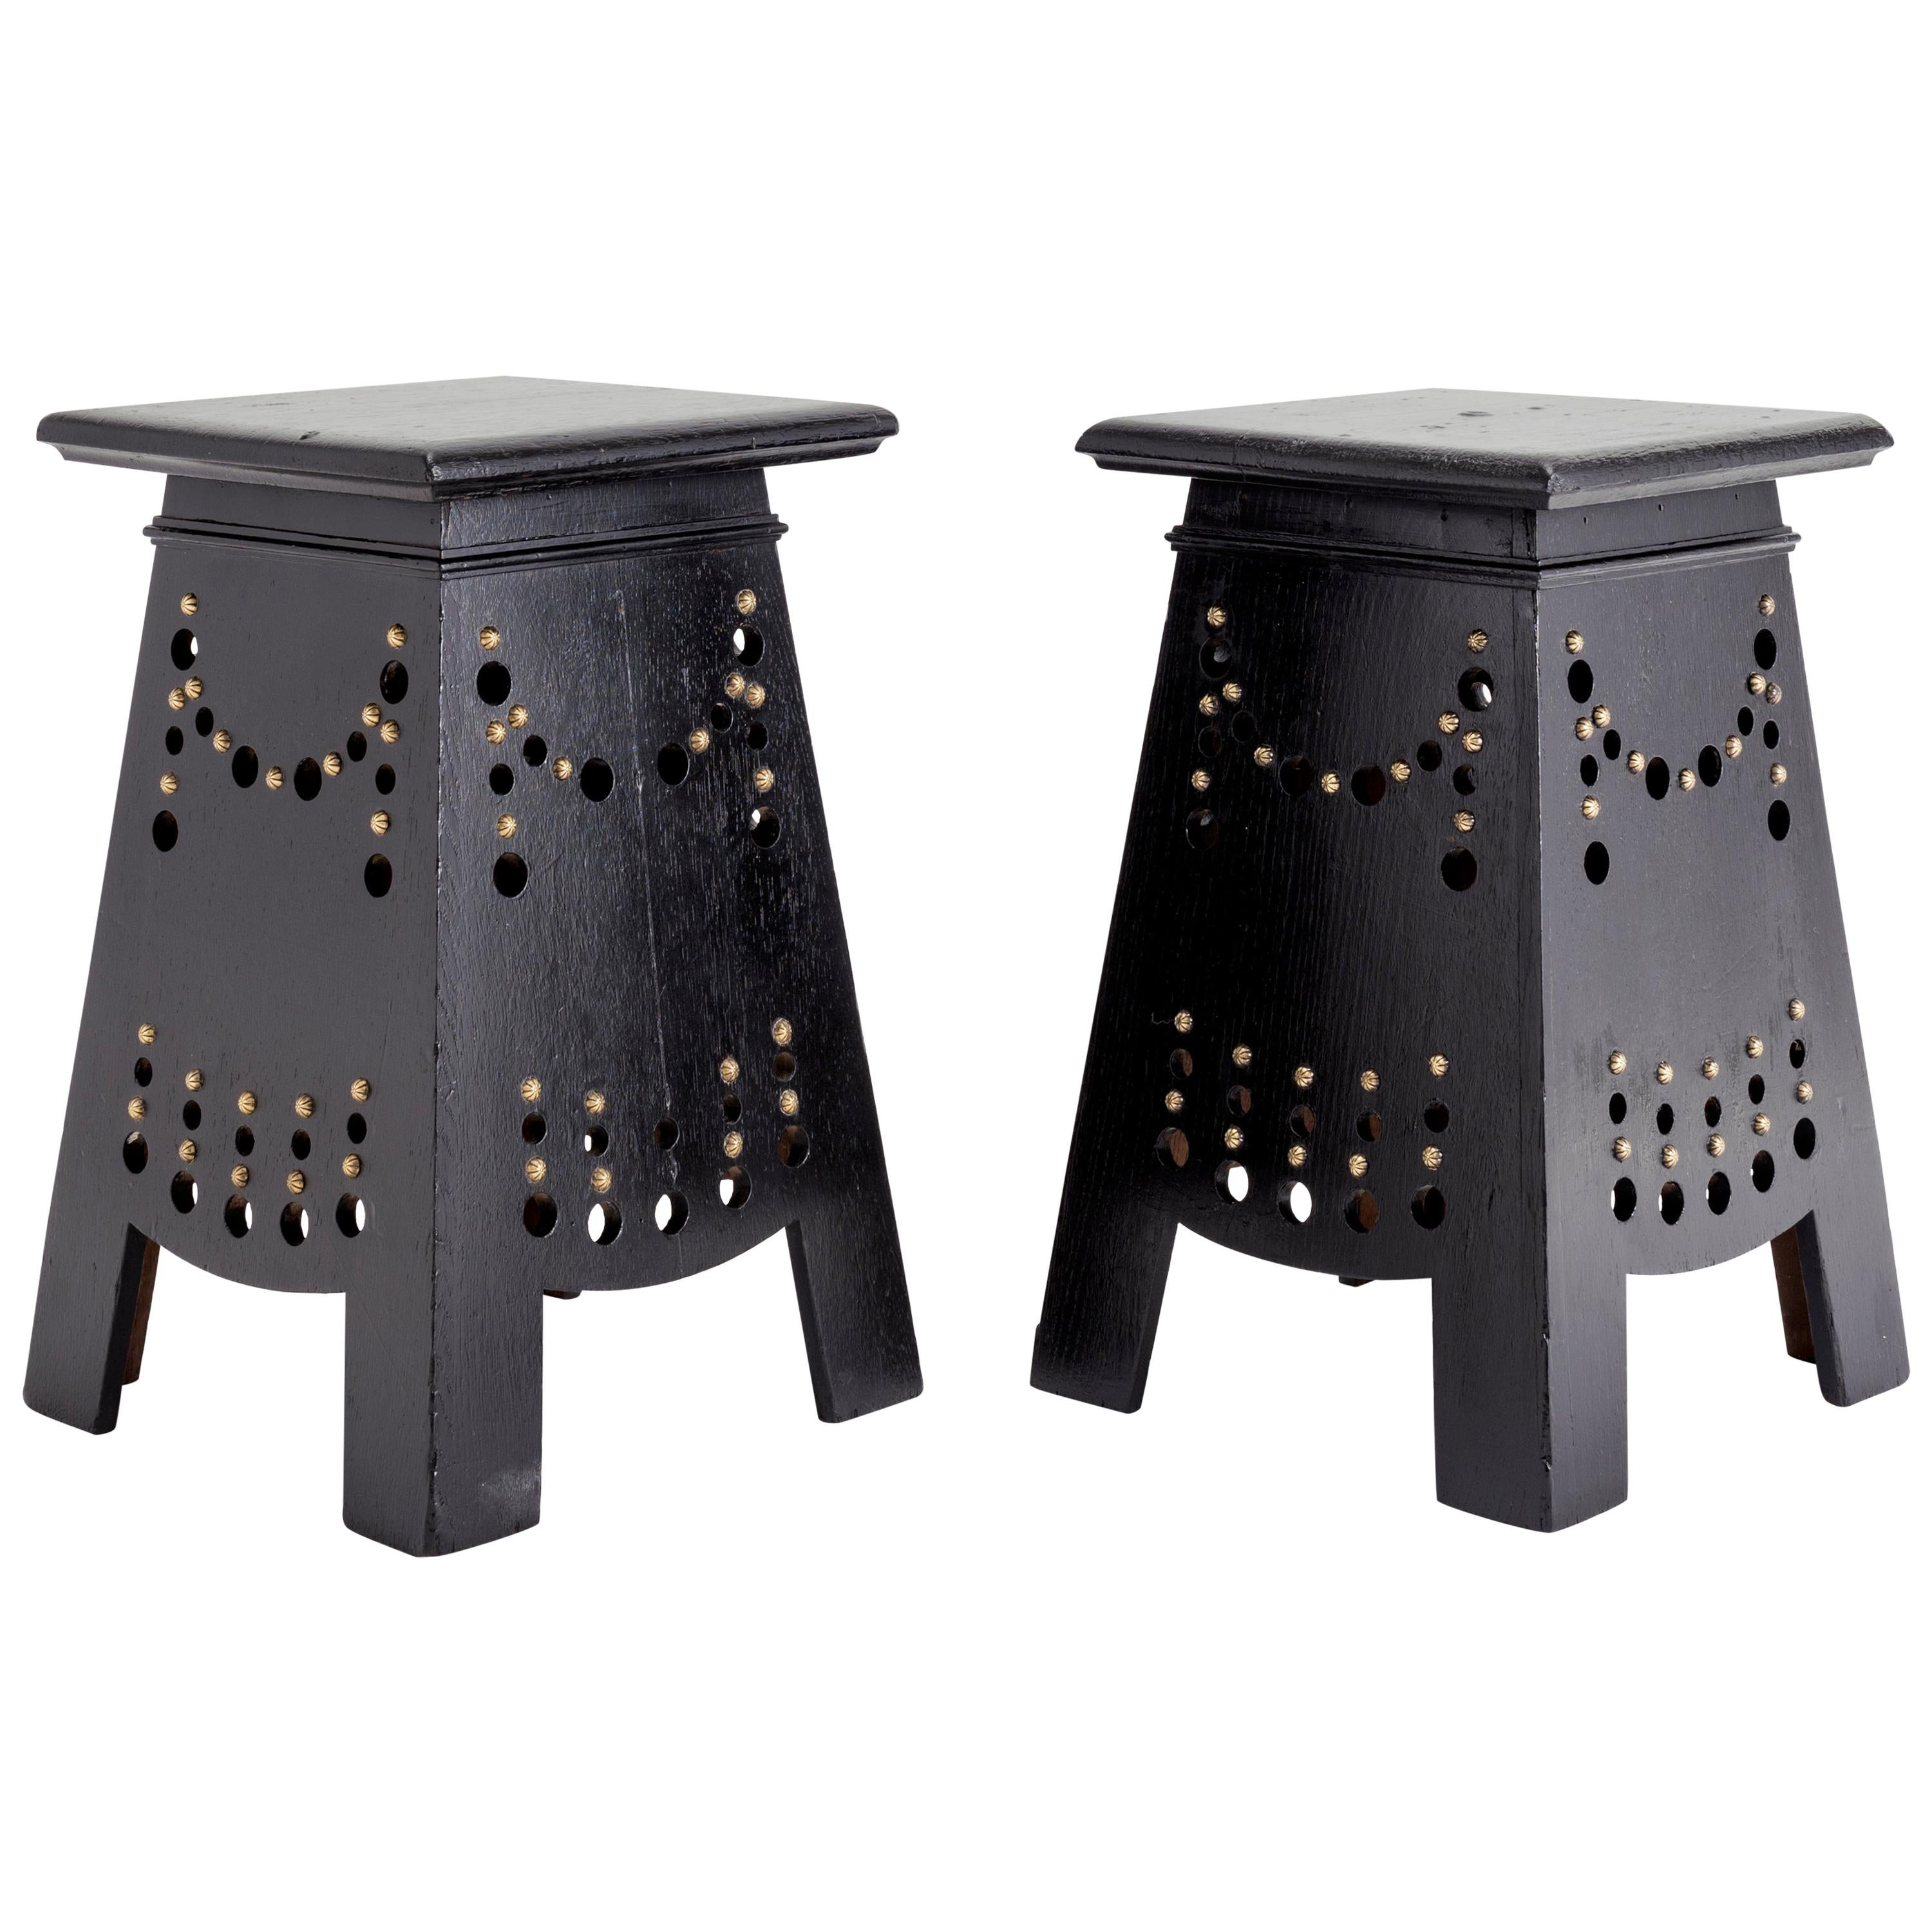 Pair of Arts & Craft Stools with Brass Studs, Belgium, Early 20th Century